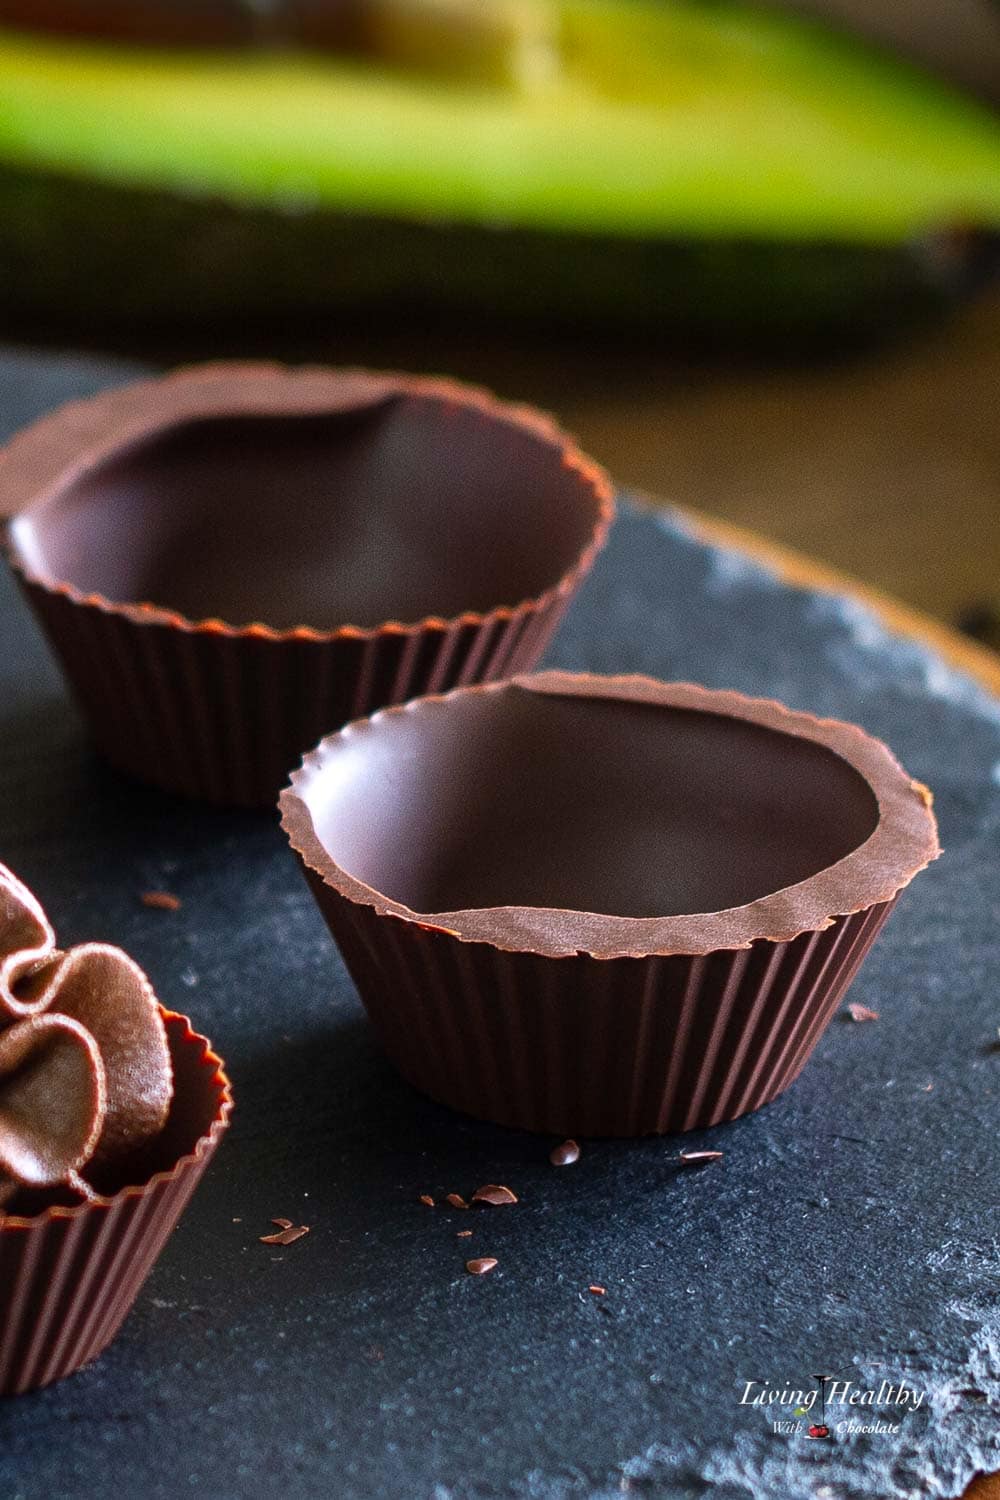 Empty chocolate cups removed from silicone molds.